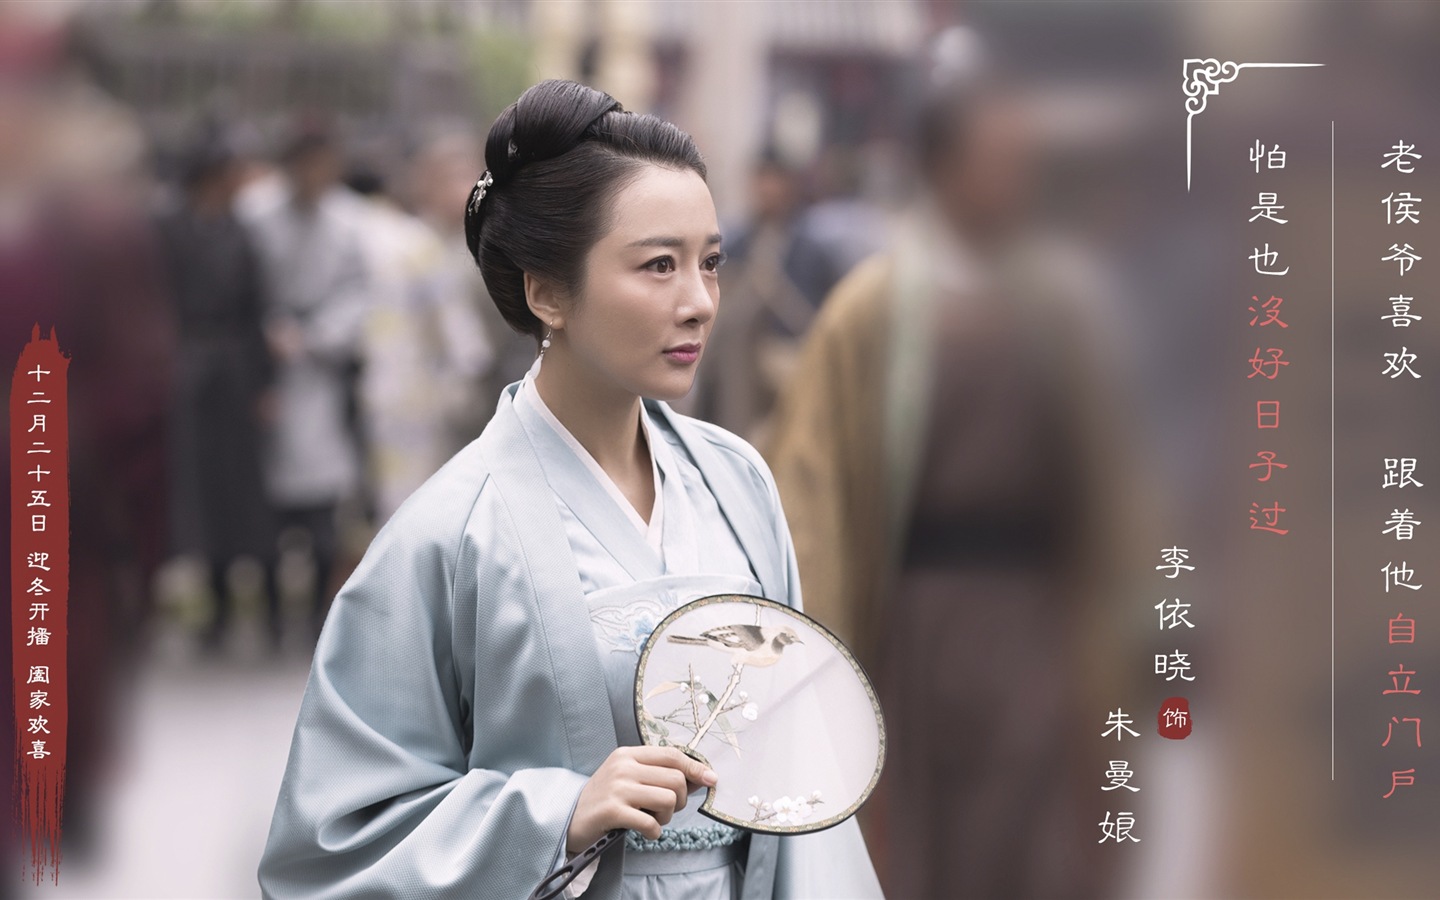 The Story Of MingLan, TV series HD wallpapers #34 - 1440x900